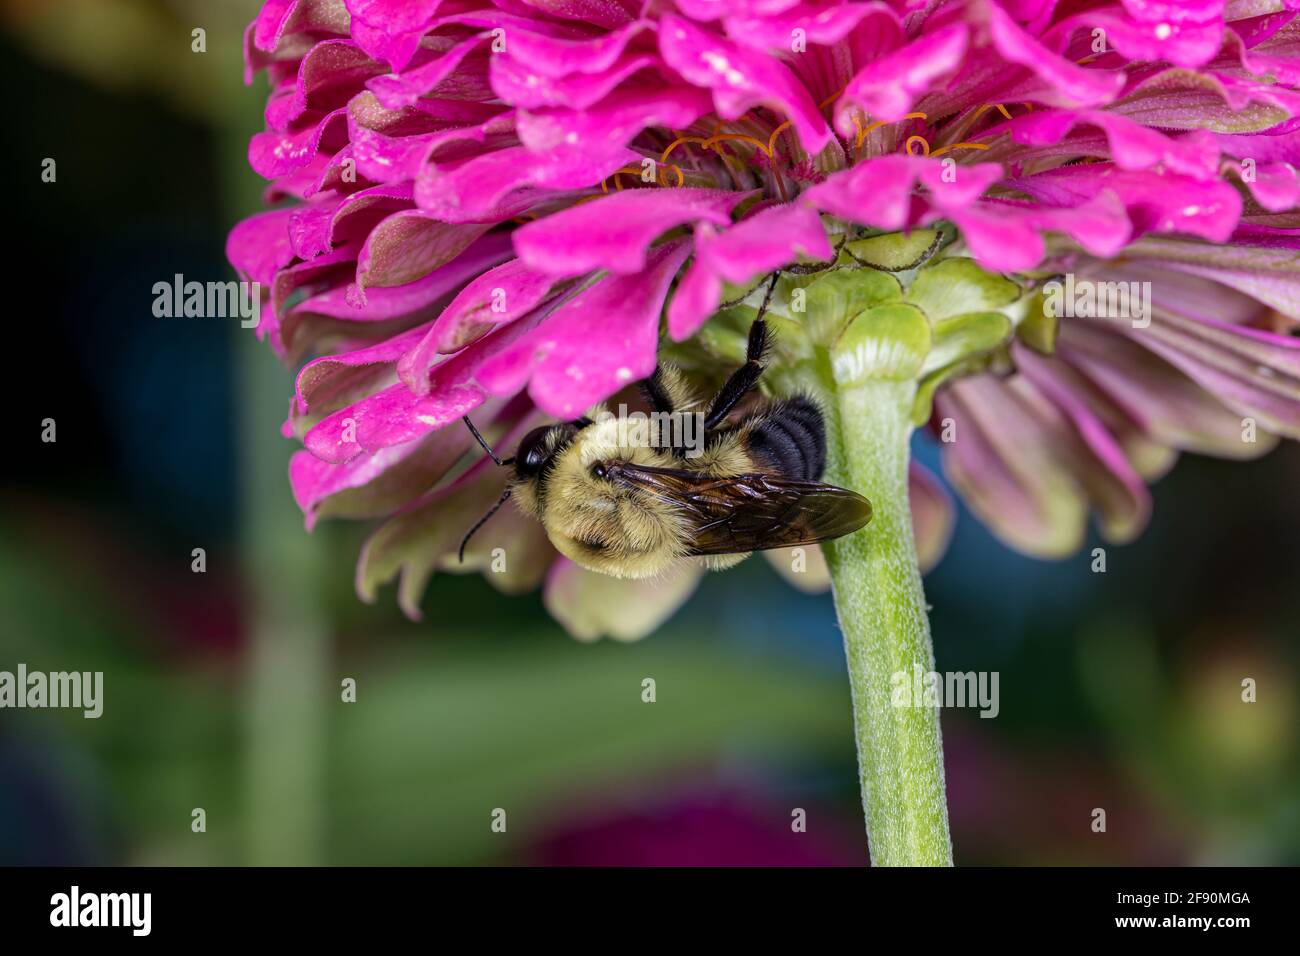 Bumble bee feeding on nectar from Zinnia wildflower. Concept of insect and wildlife conservation, habitat preservation, and backyard flower garden Stock Photo